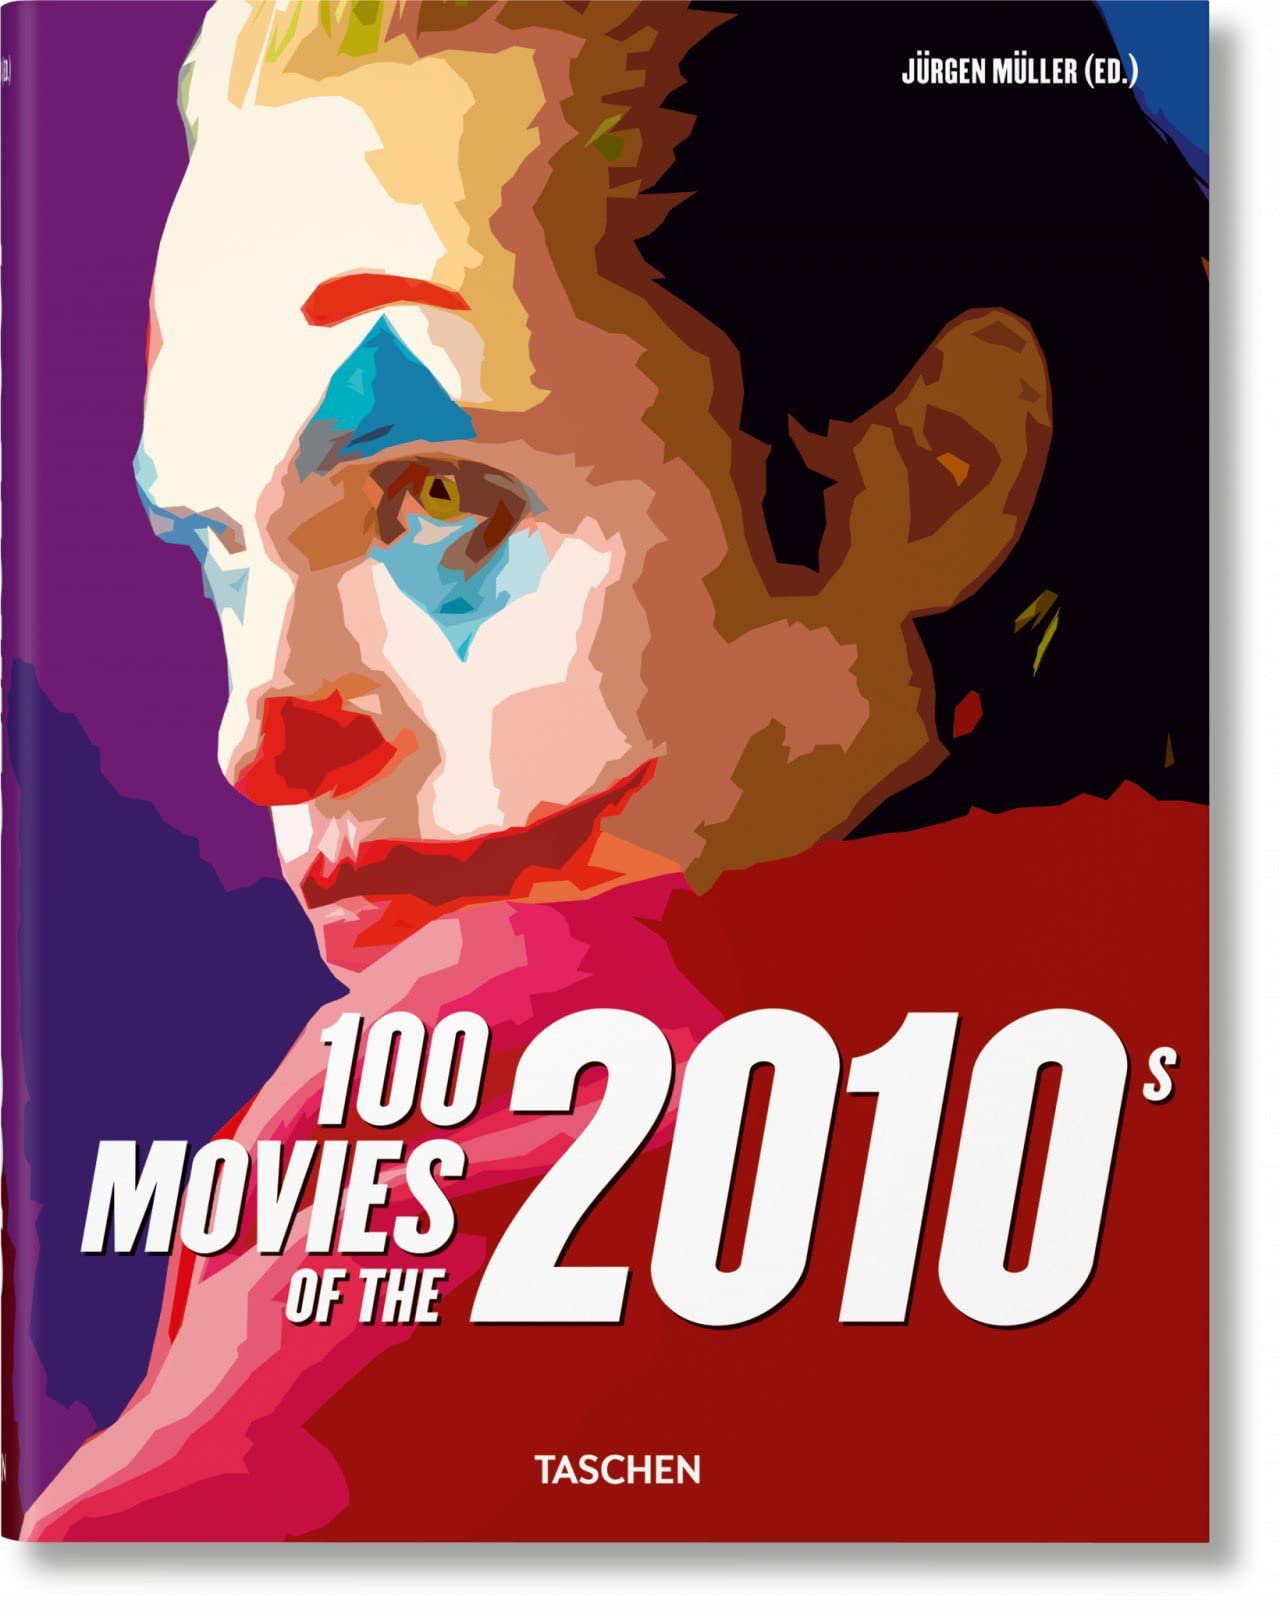 Muller J. - 100 Movies of the 2010s